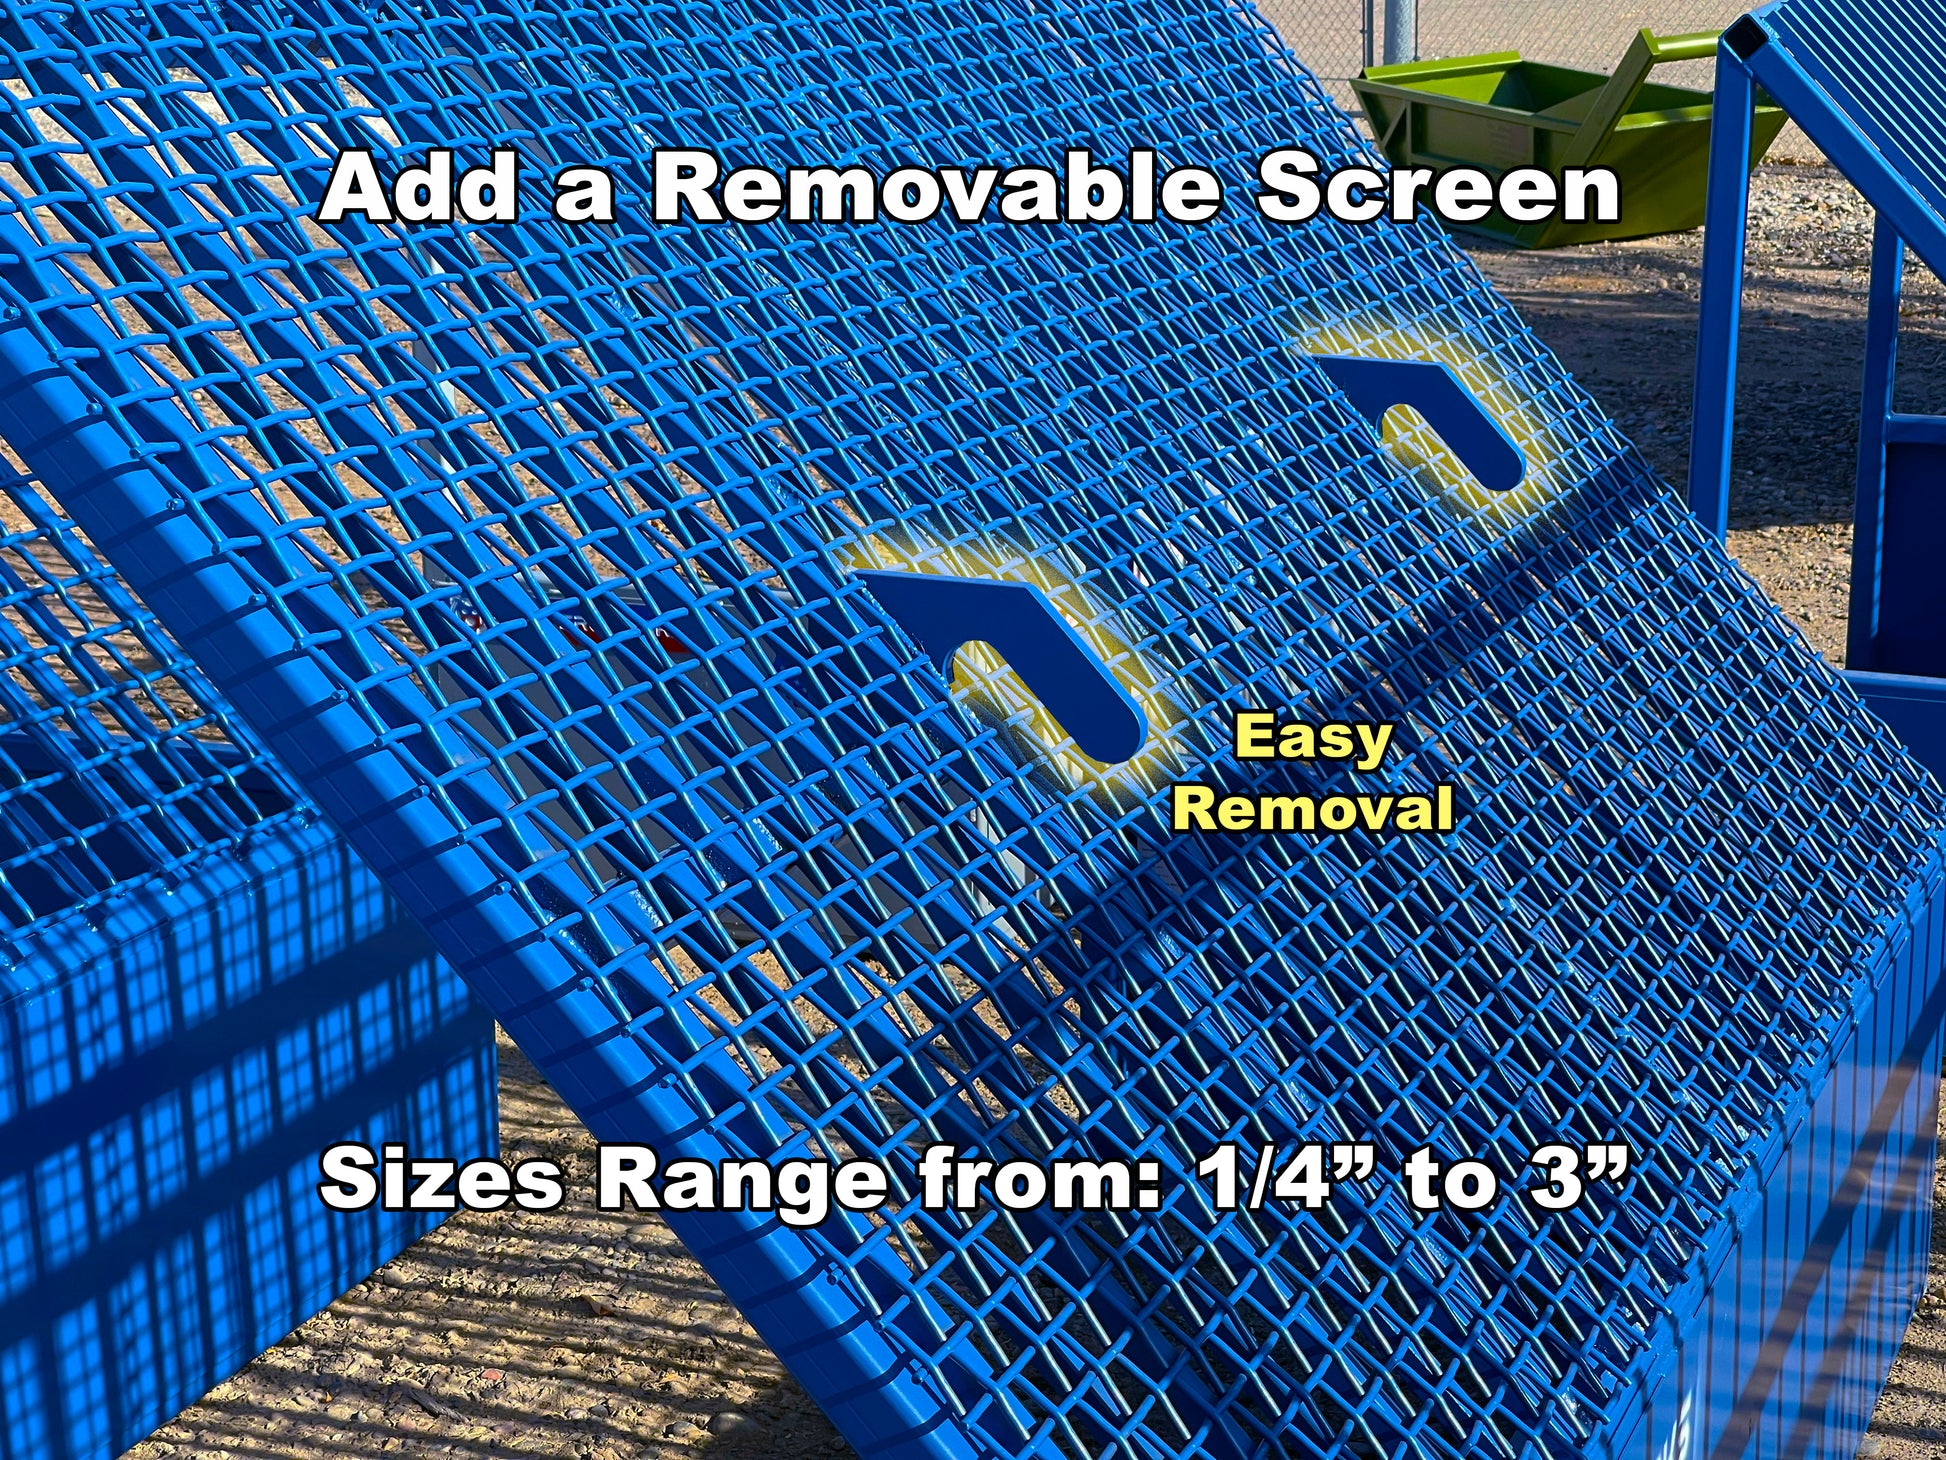 Removable screen system for a grizzly rock screen